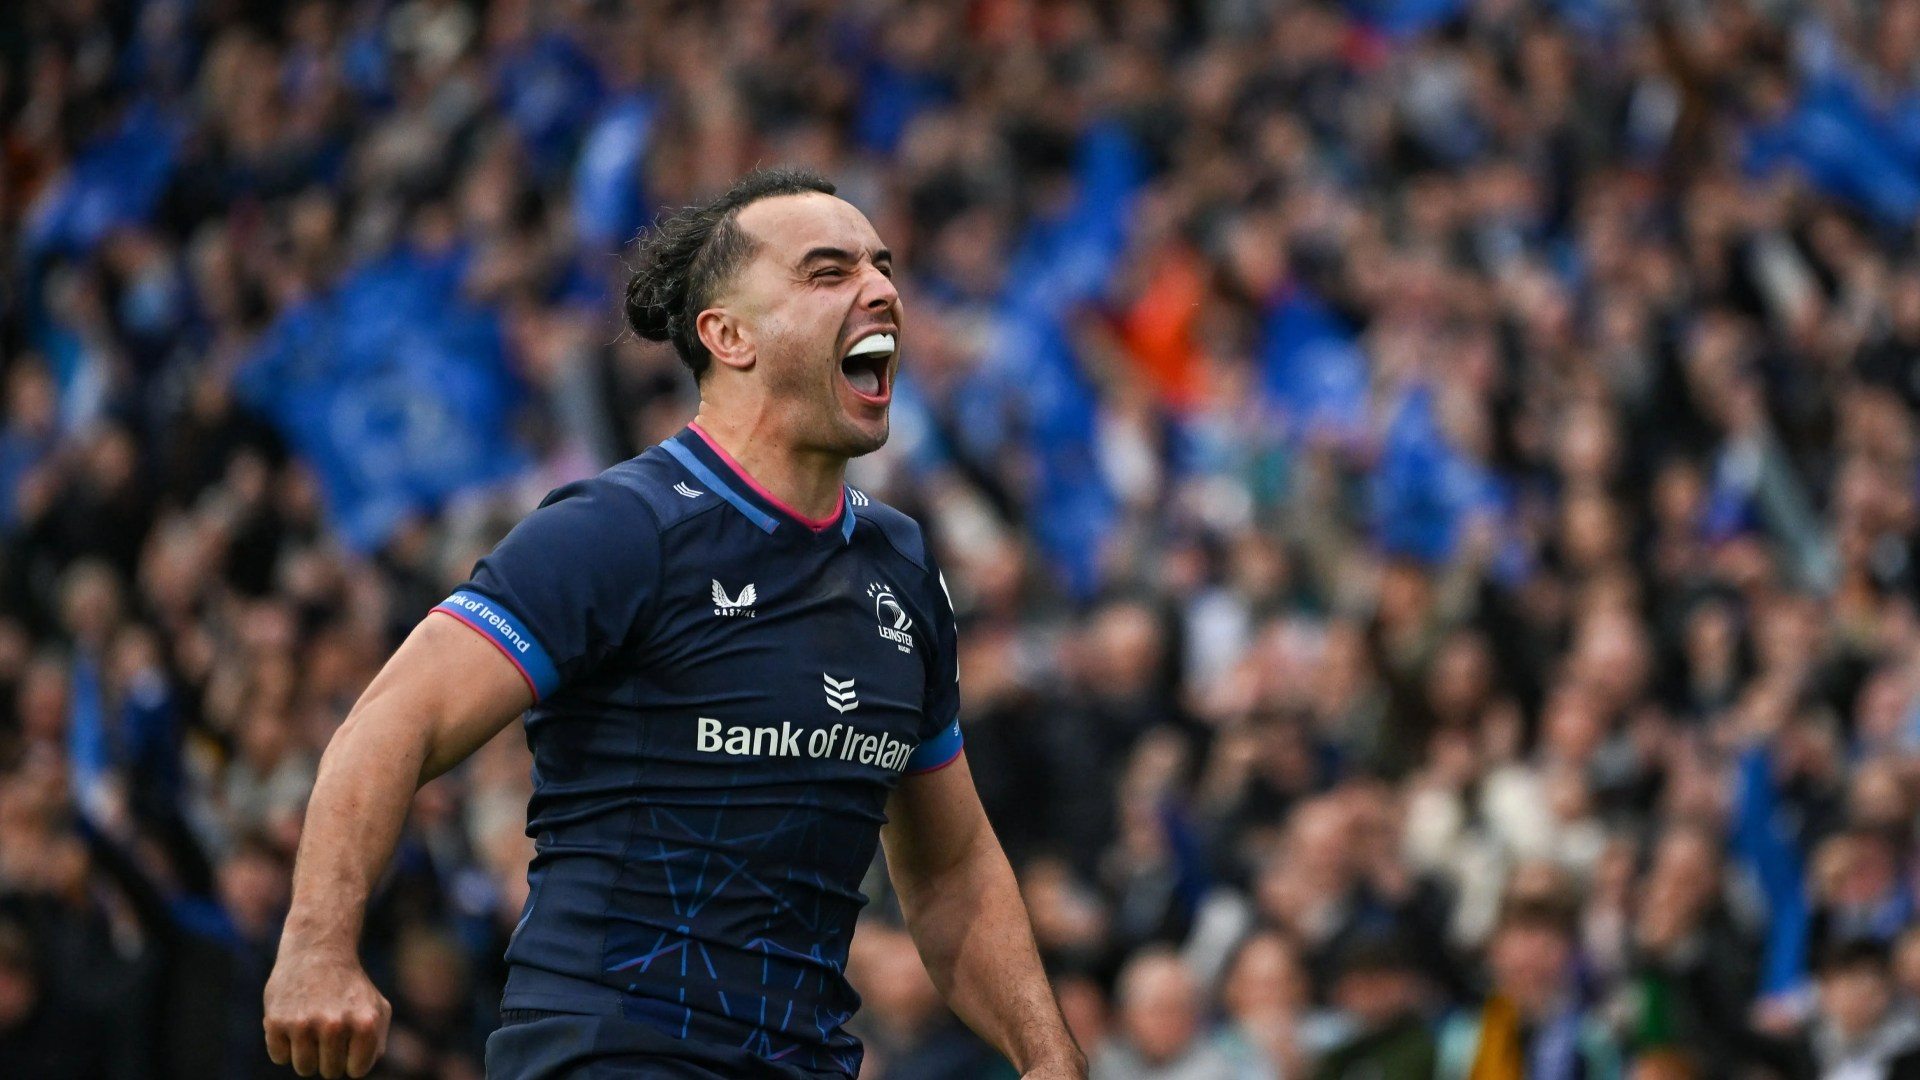 Leinster fans being ripped off over ‘outrageous’ flight prices to London for Champions Cup final weekend [Video]